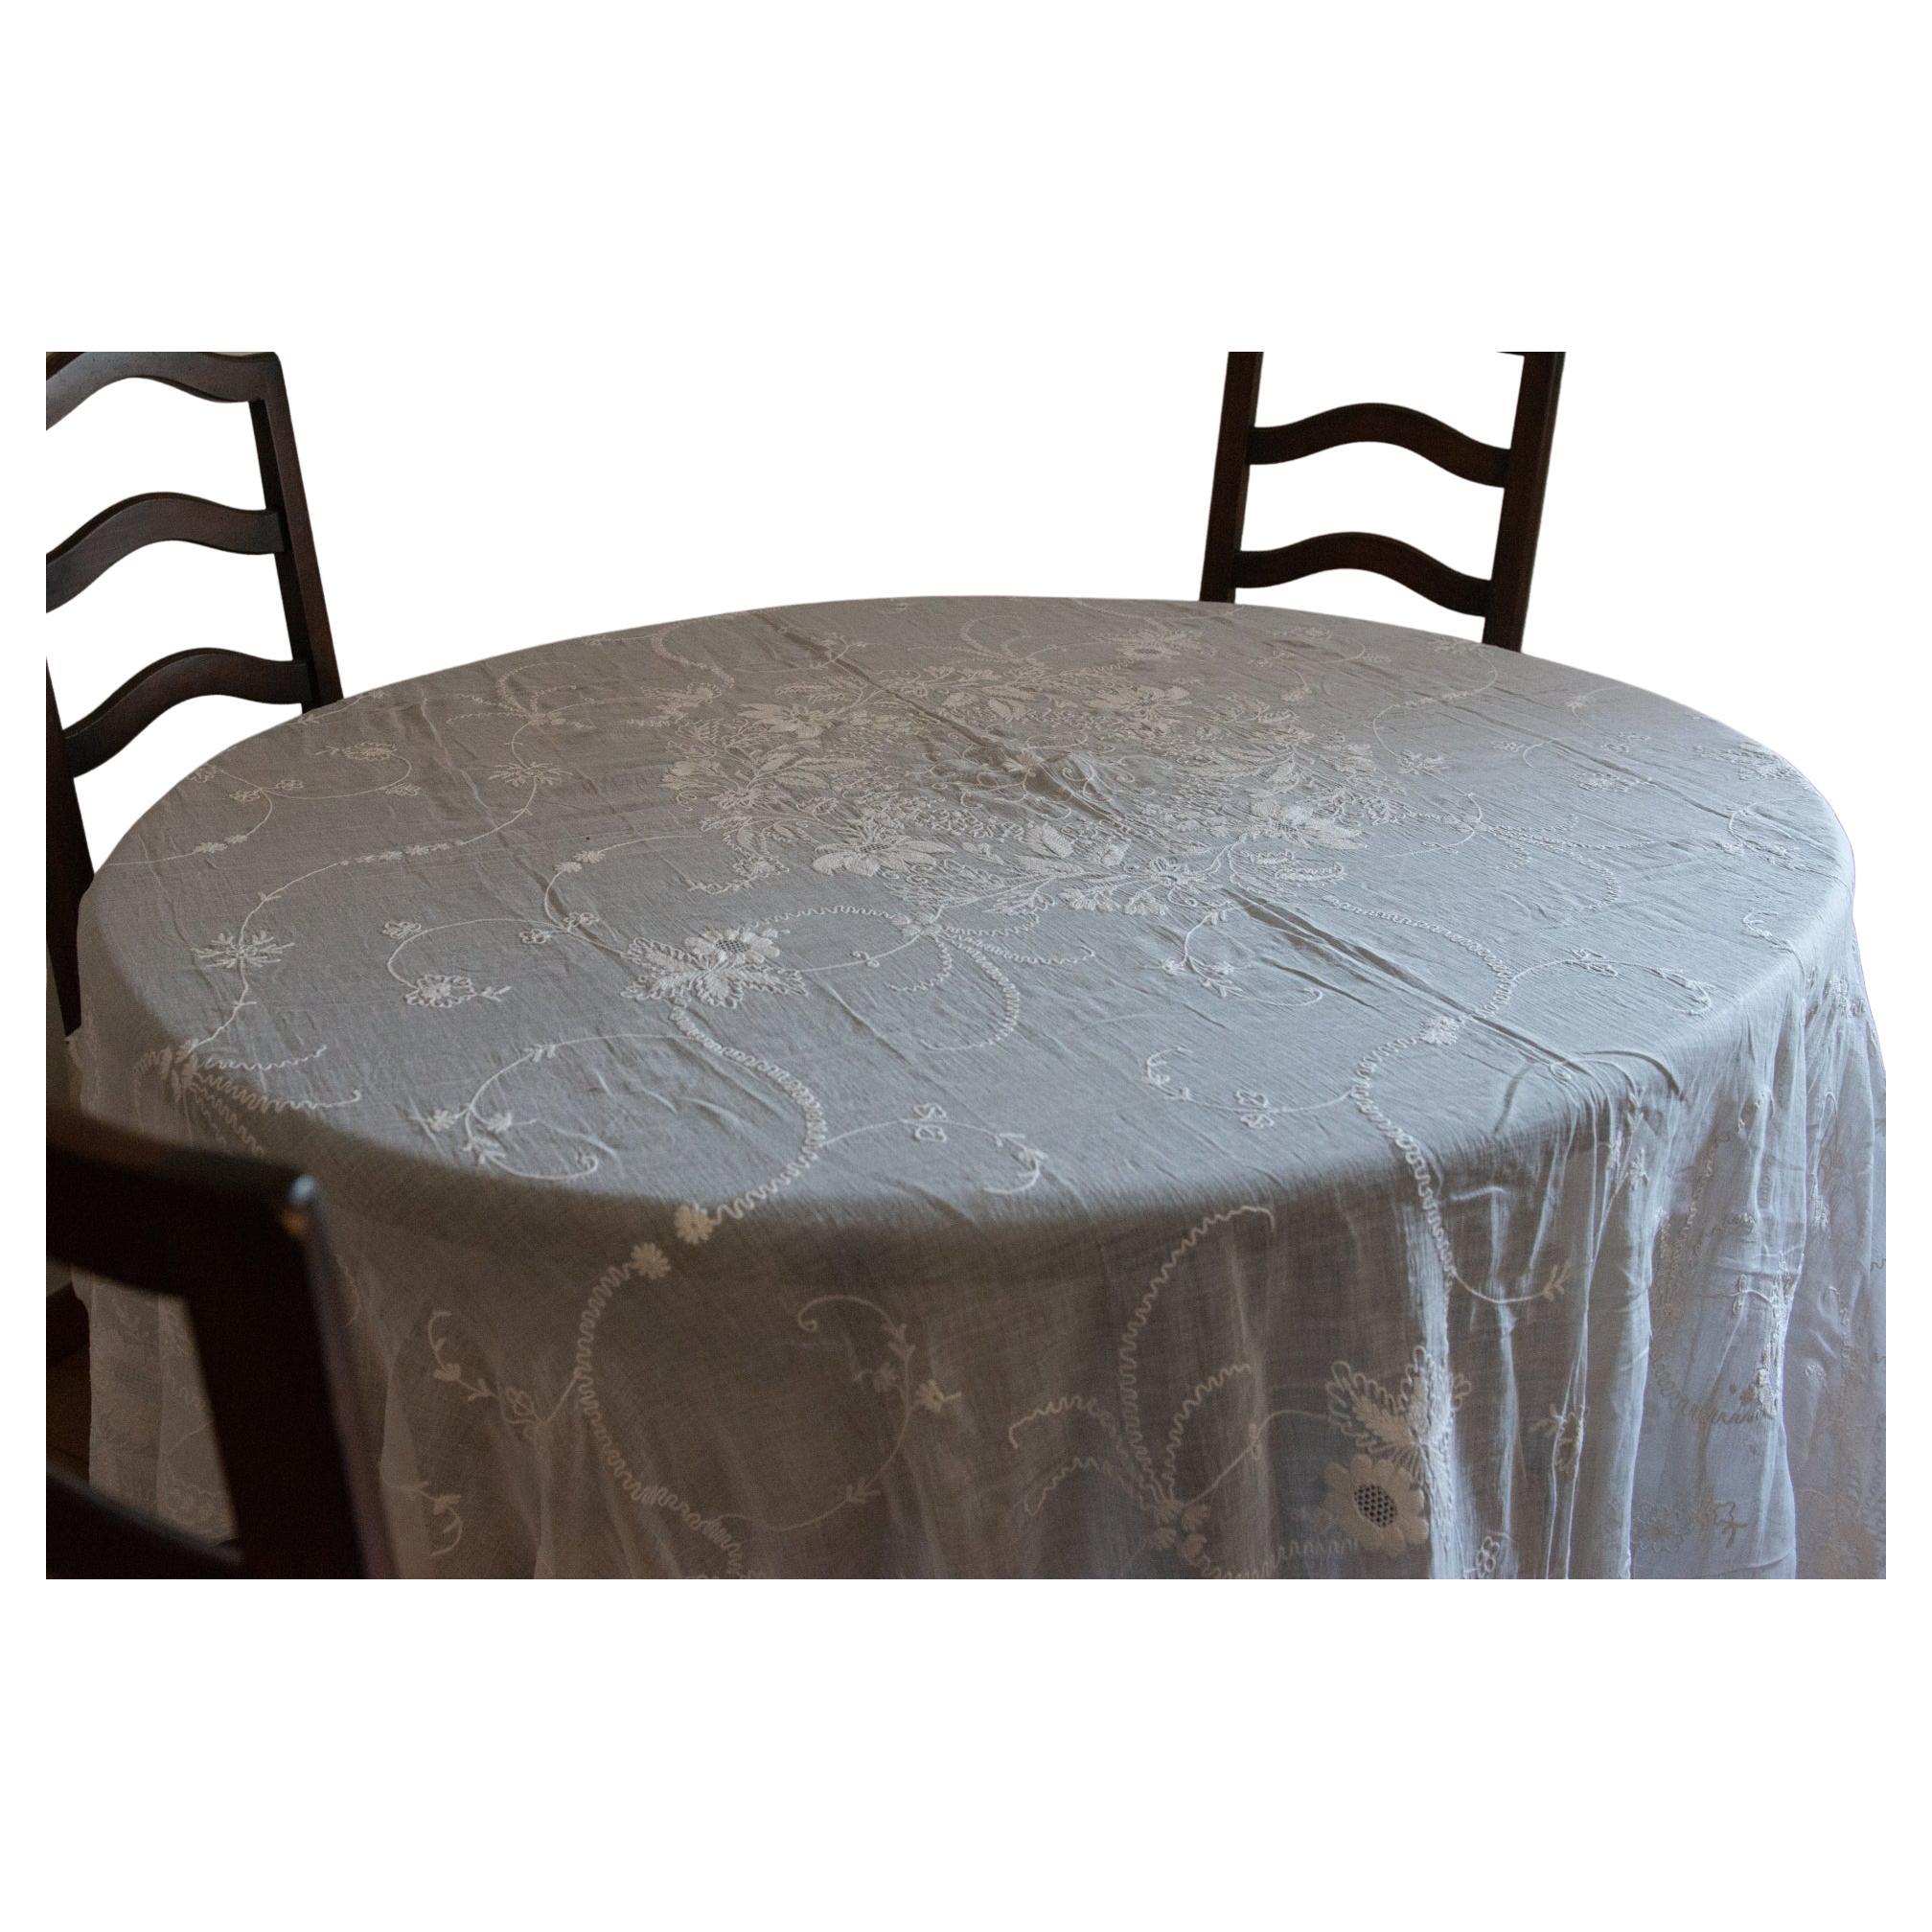 It's a rare perfect antique bed cover or important tablecloth, in completely French  hand embroidered cotton batiste named 